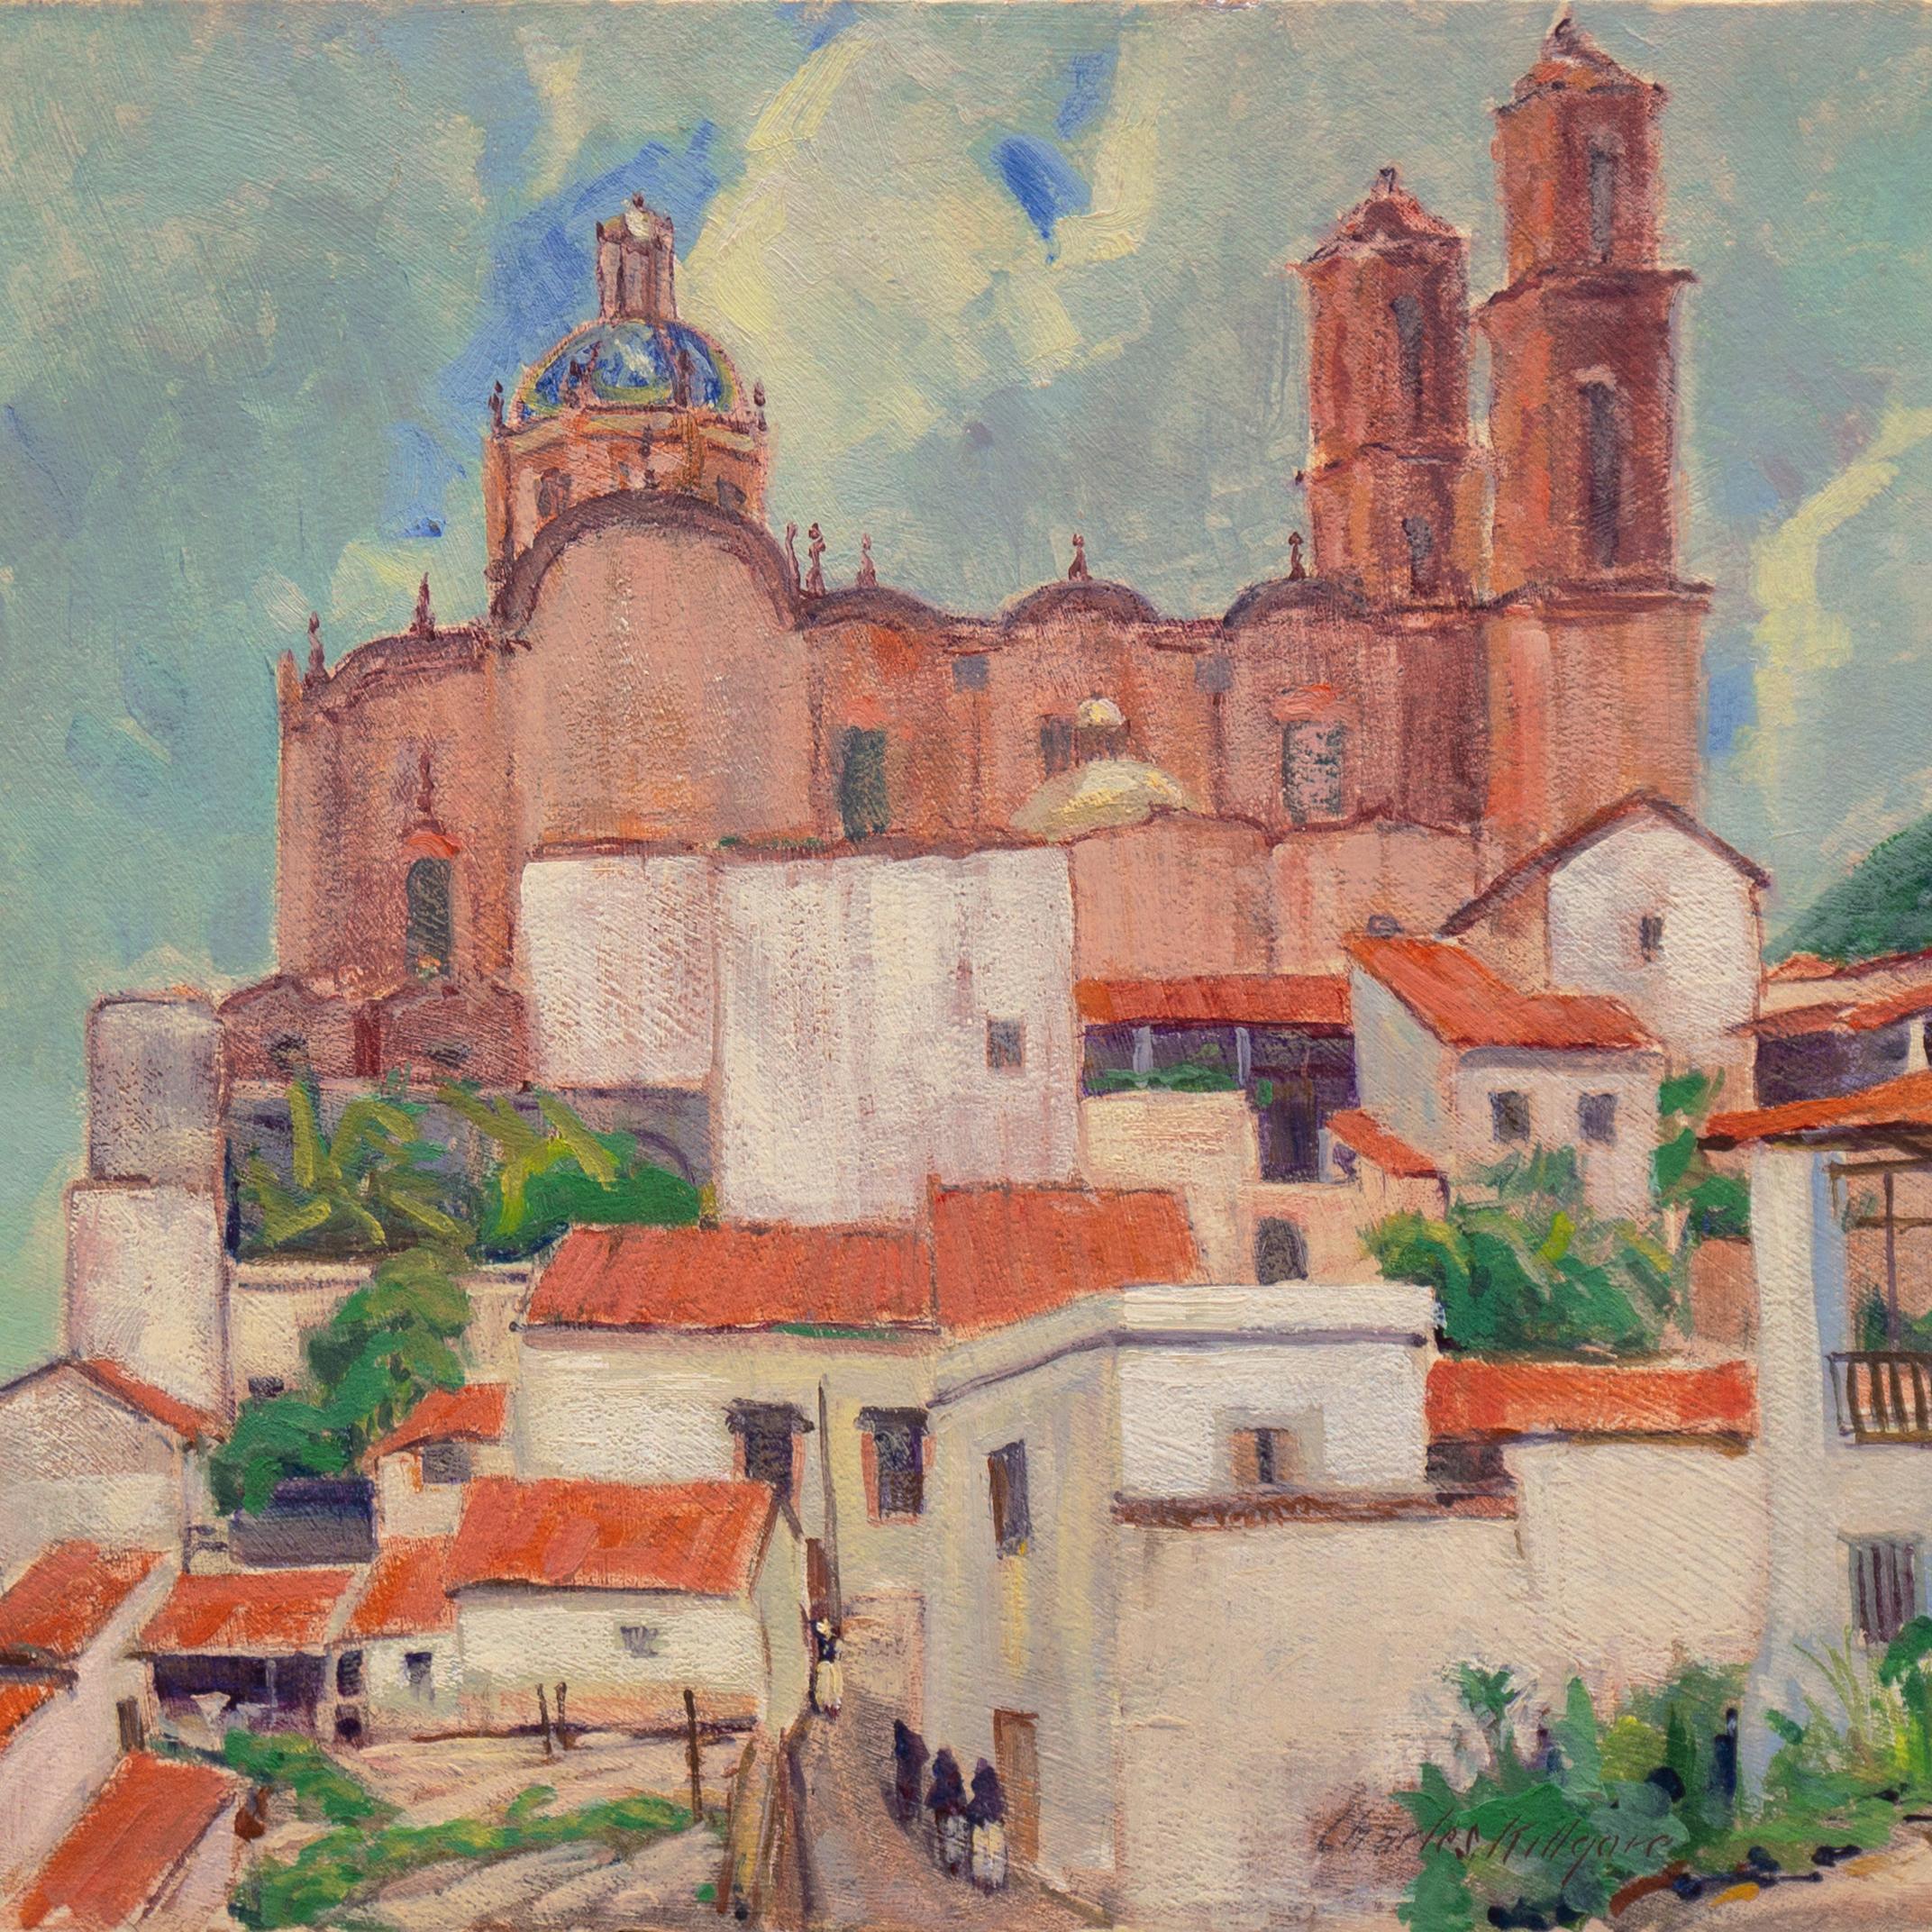 Taxco, Mexique, Paris, Louvre, Who Was Who in American Art, PAFA, AIC - Moderne Painting par Charles Killgore